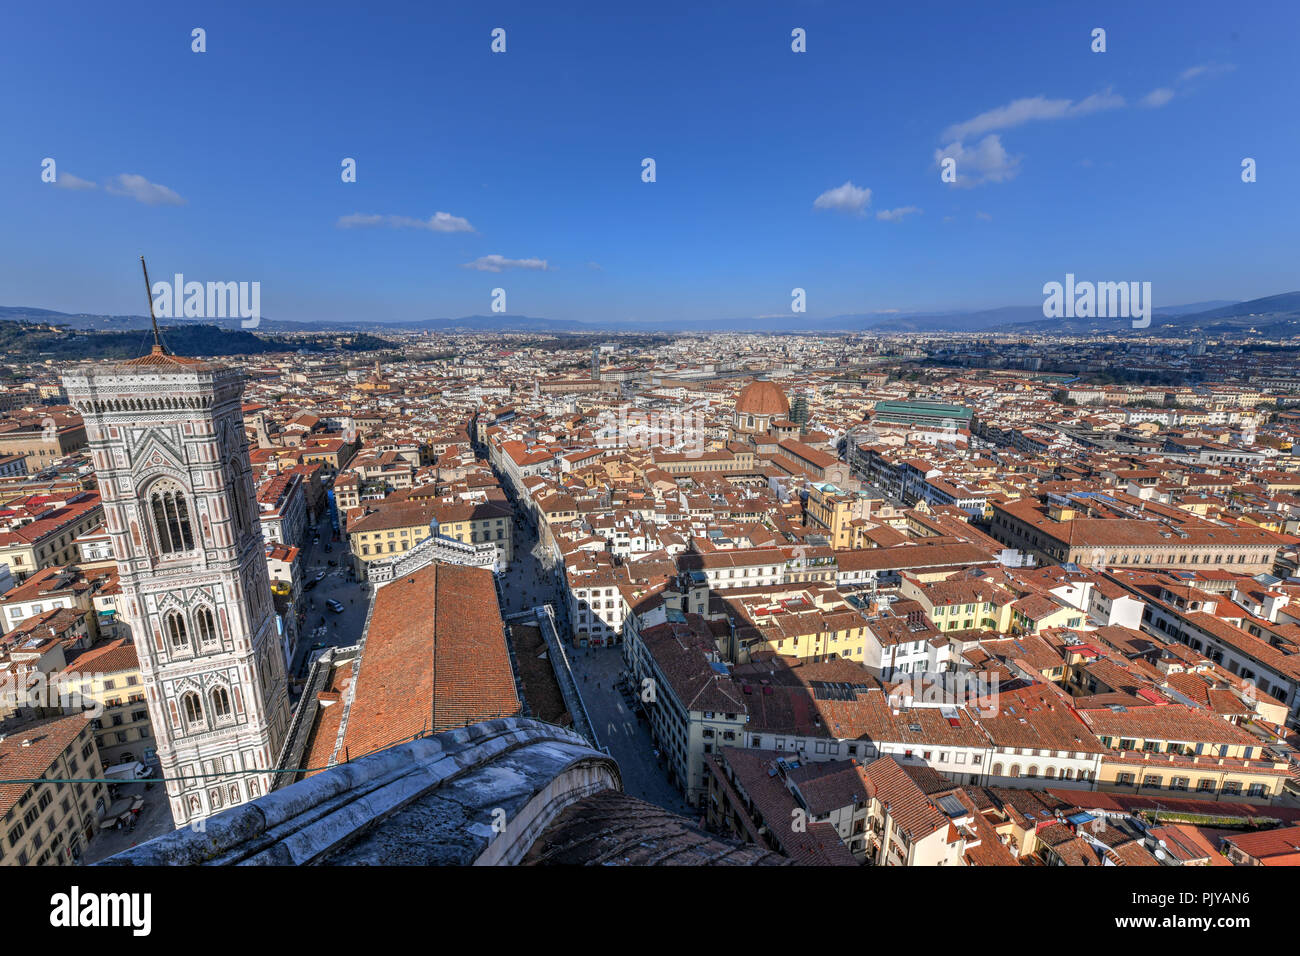 Florence Duomo. Basilica di Santa Maria del Fiore (Basilica of Saint Mary of the Flower) in Florence, Italy. Stock Photo